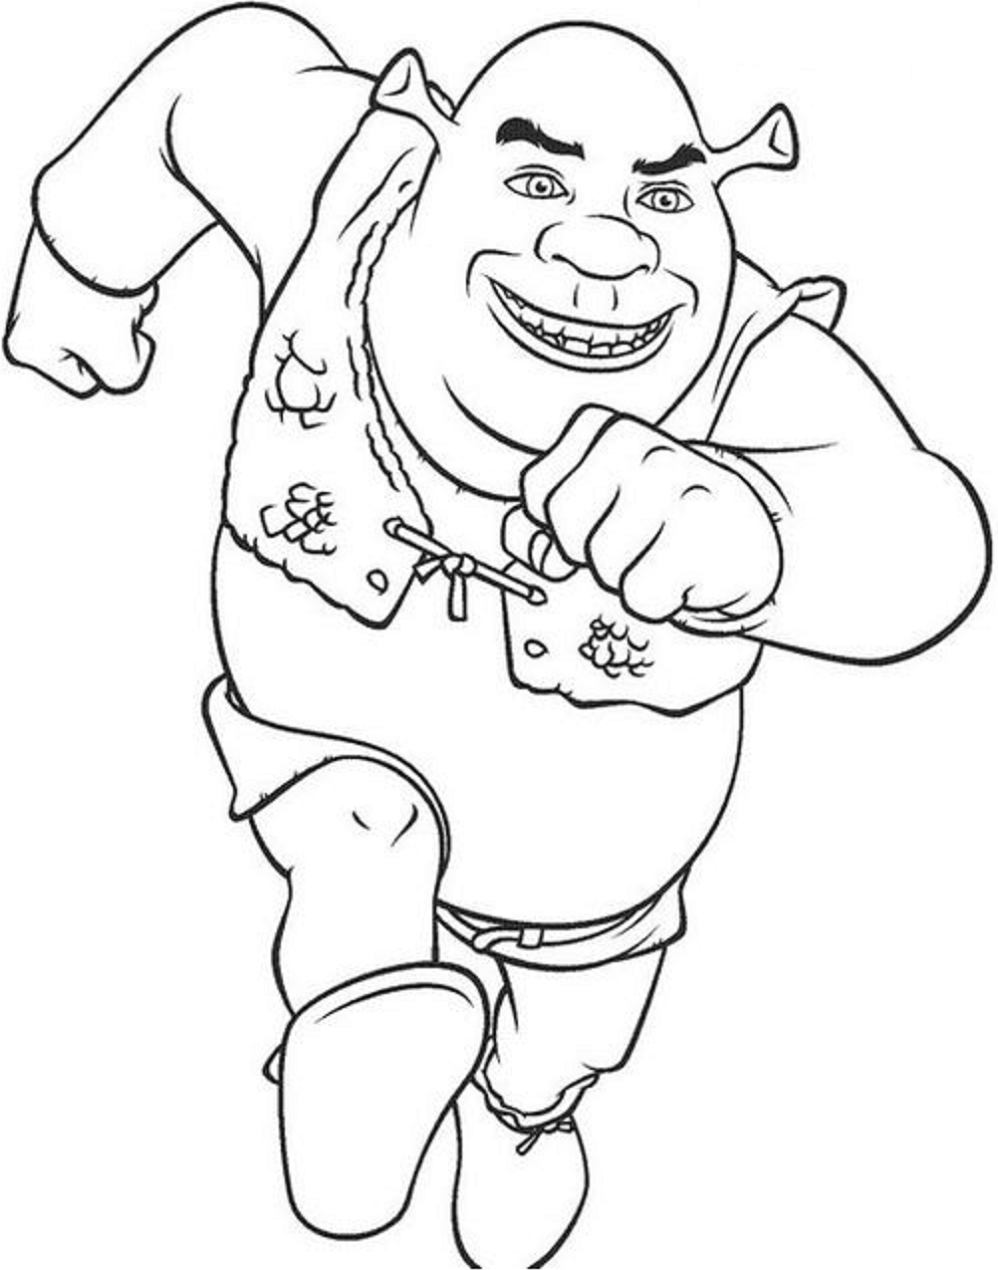 Download Shrek Coloring Pages - Free Printable Coloring Pages for Kids